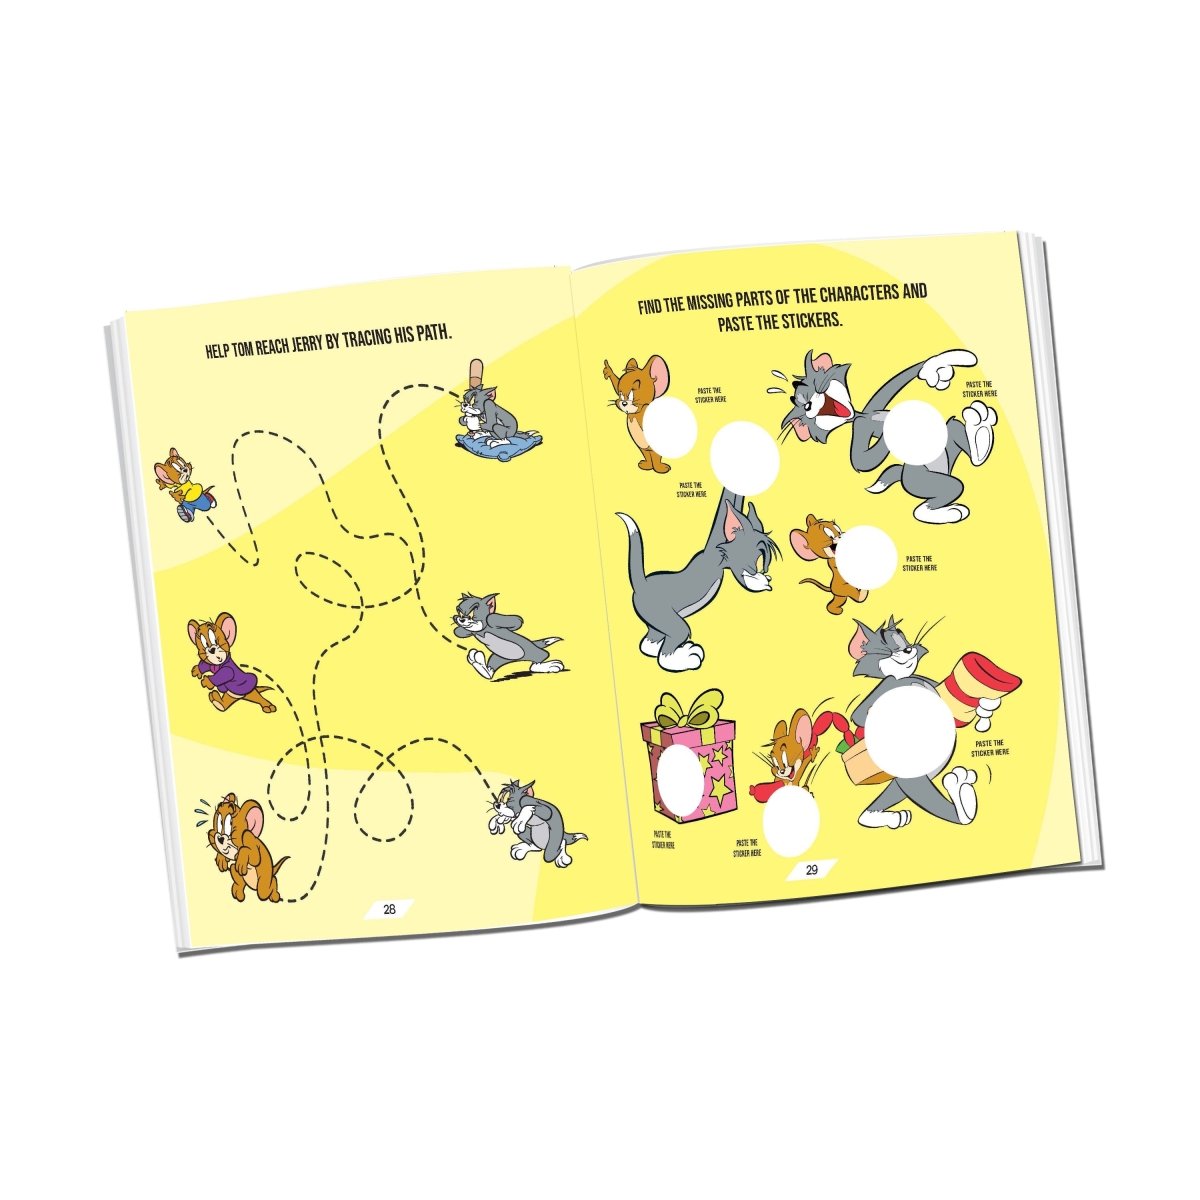 Dreamland Publications Tom and Jerry Copy Colouring And Activity Books Pack ( A Pack of 3 Books) - 9789394767867